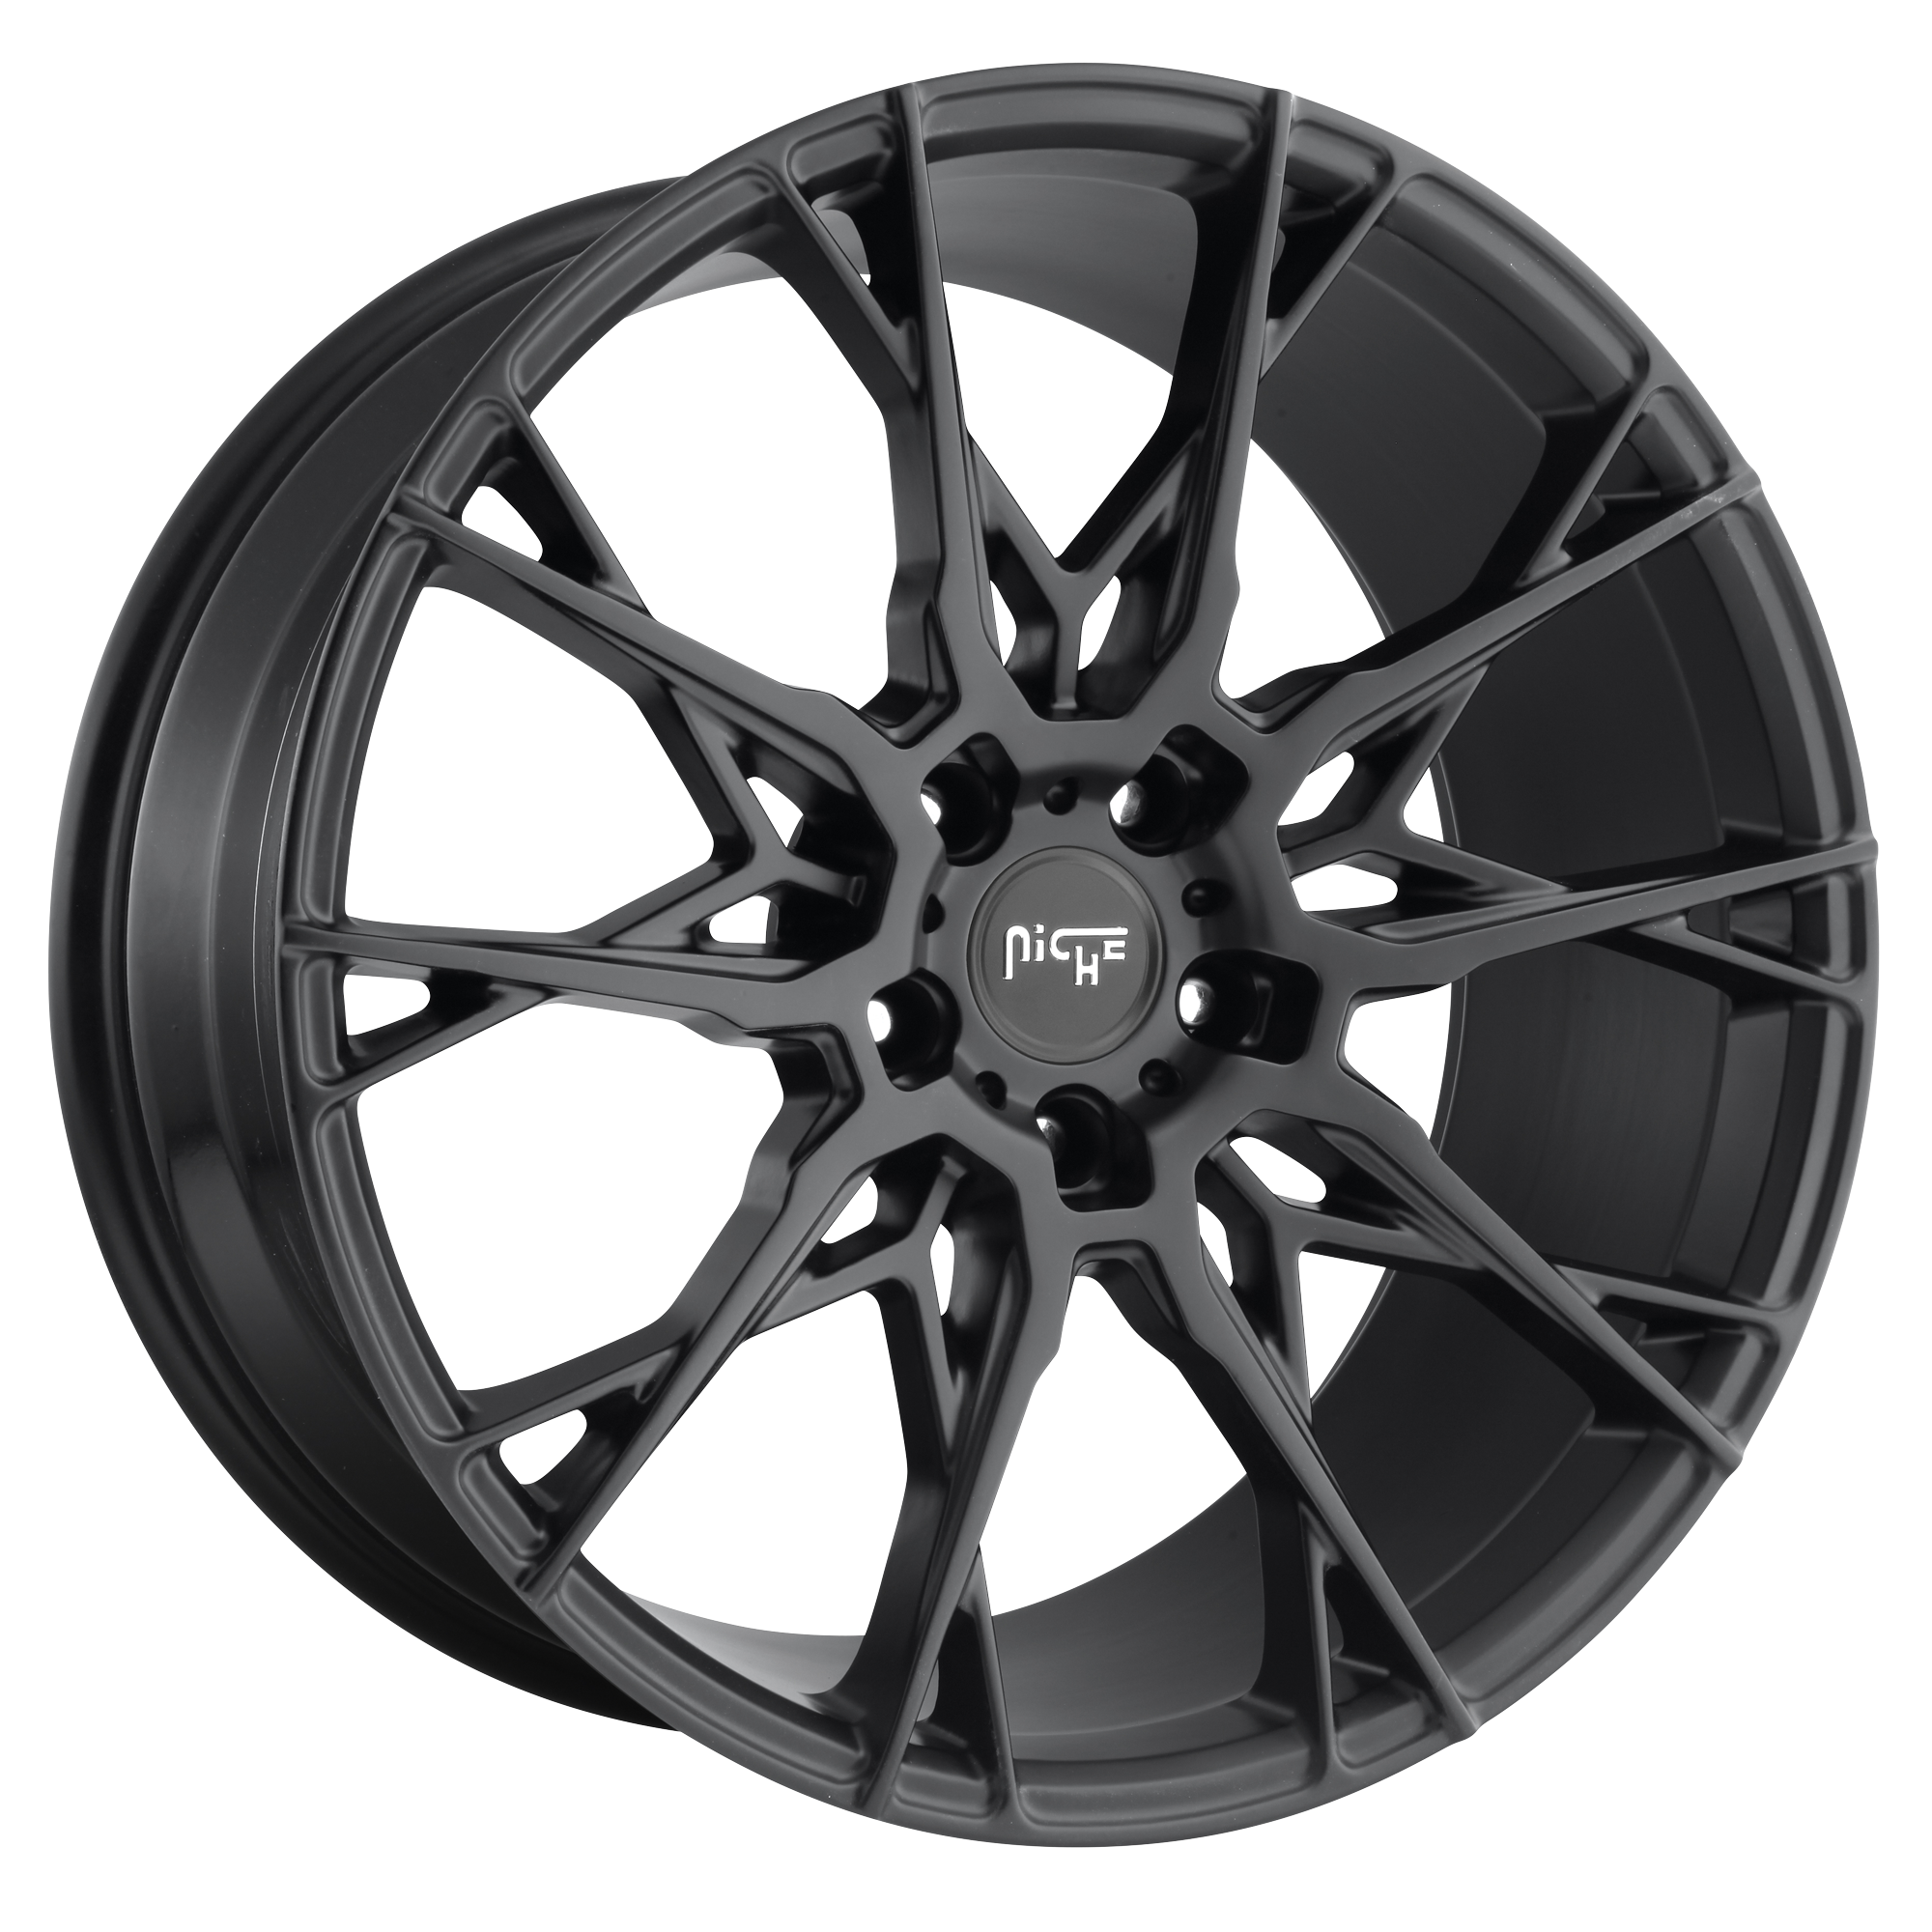 STACCATO 18x8.5 5x112.00 MATTE BLACK (35 mm) - Tires and Engine Performance